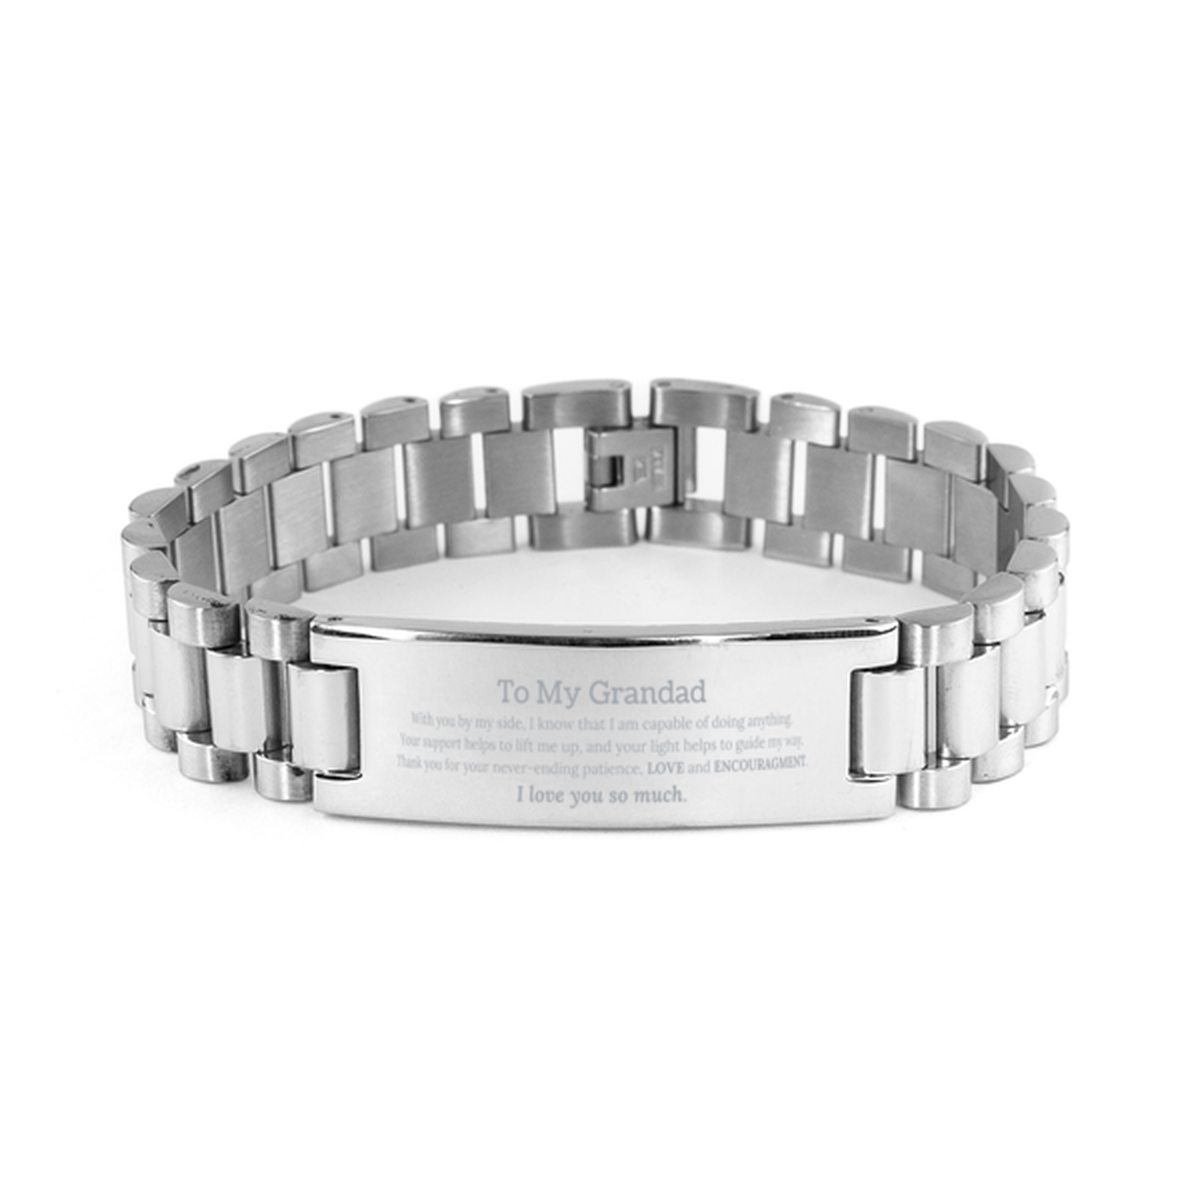 Appreciation Grandad Ladder Stainless Steel Bracelet Gifts, To My Grandad Birthday Christmas Wedding Keepsake Gifts for Grandad With you by my side, I know that I am capable of doing anything. I love you so much